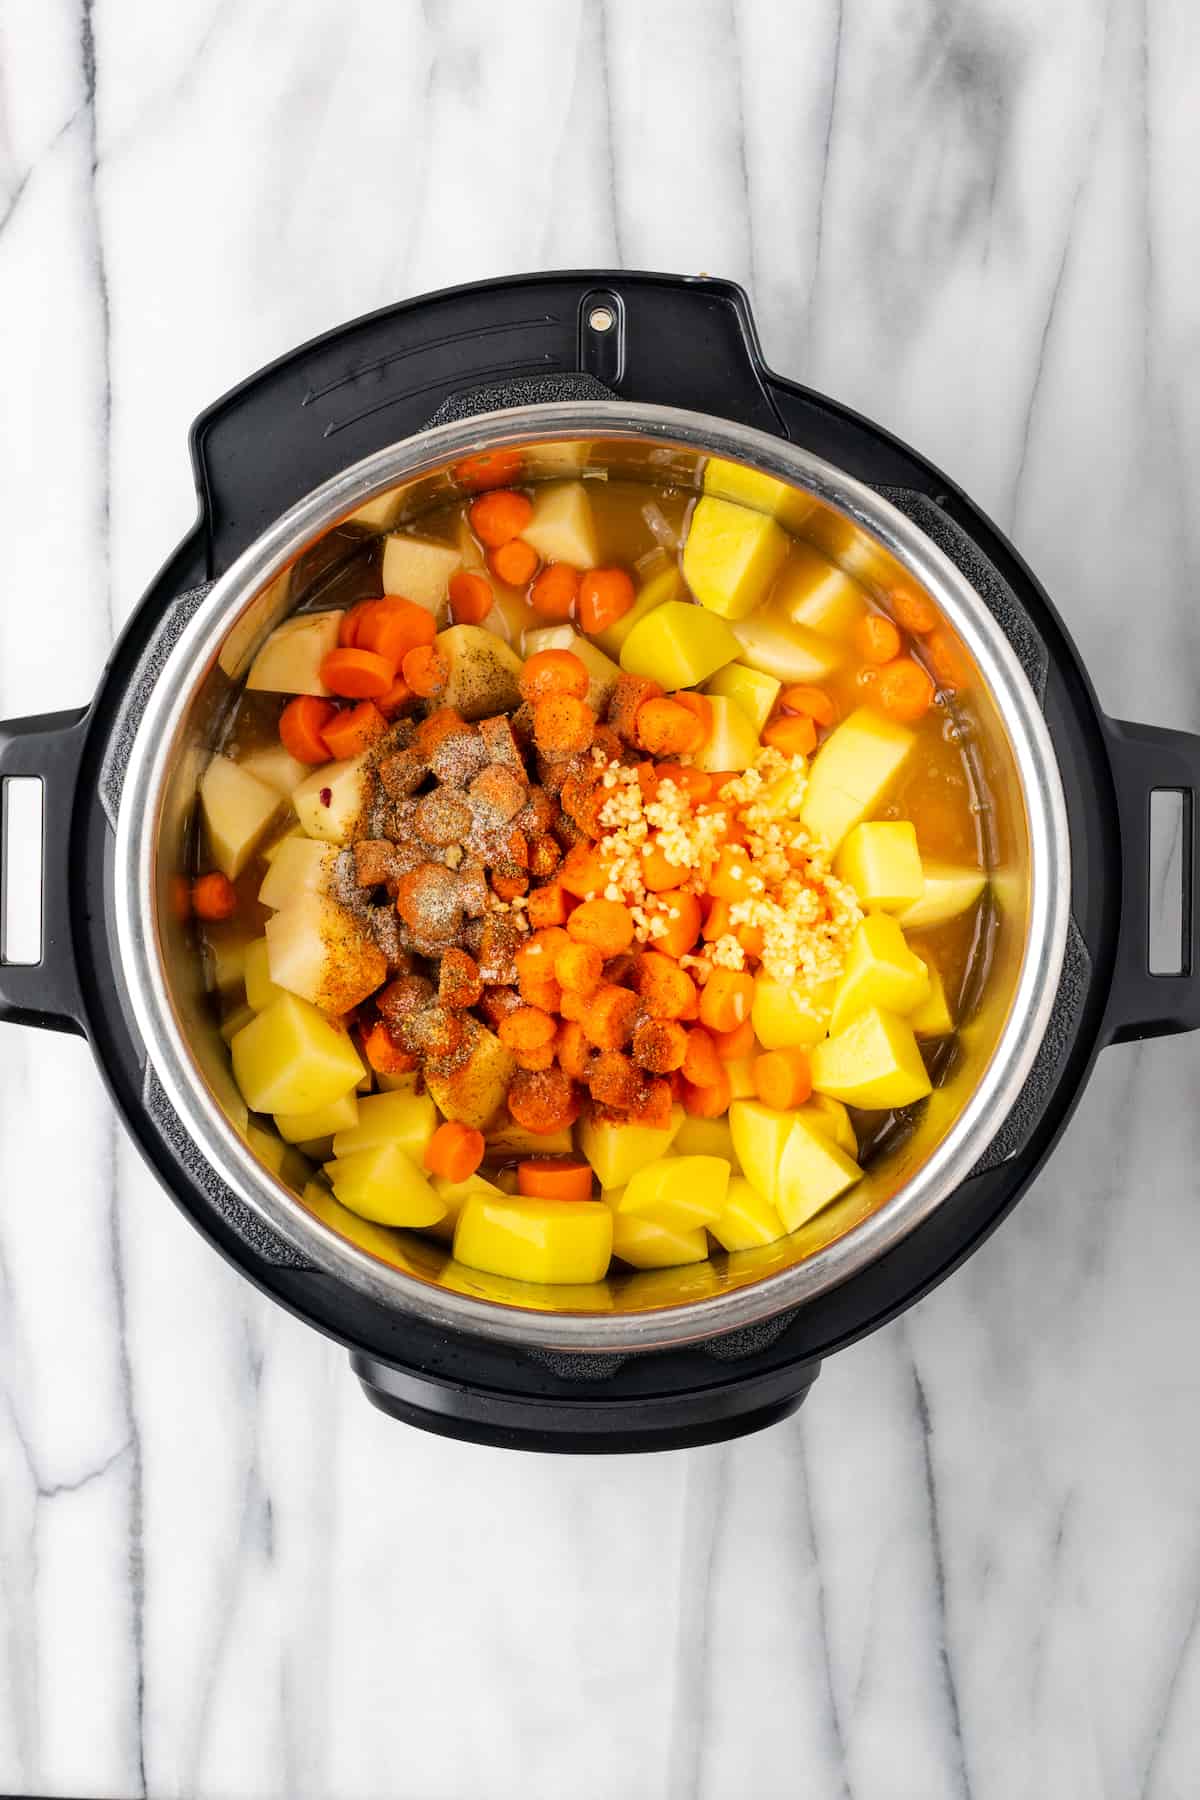 An instant pot filled with raw potatoes, carrot,s veggie broth, and seasonings